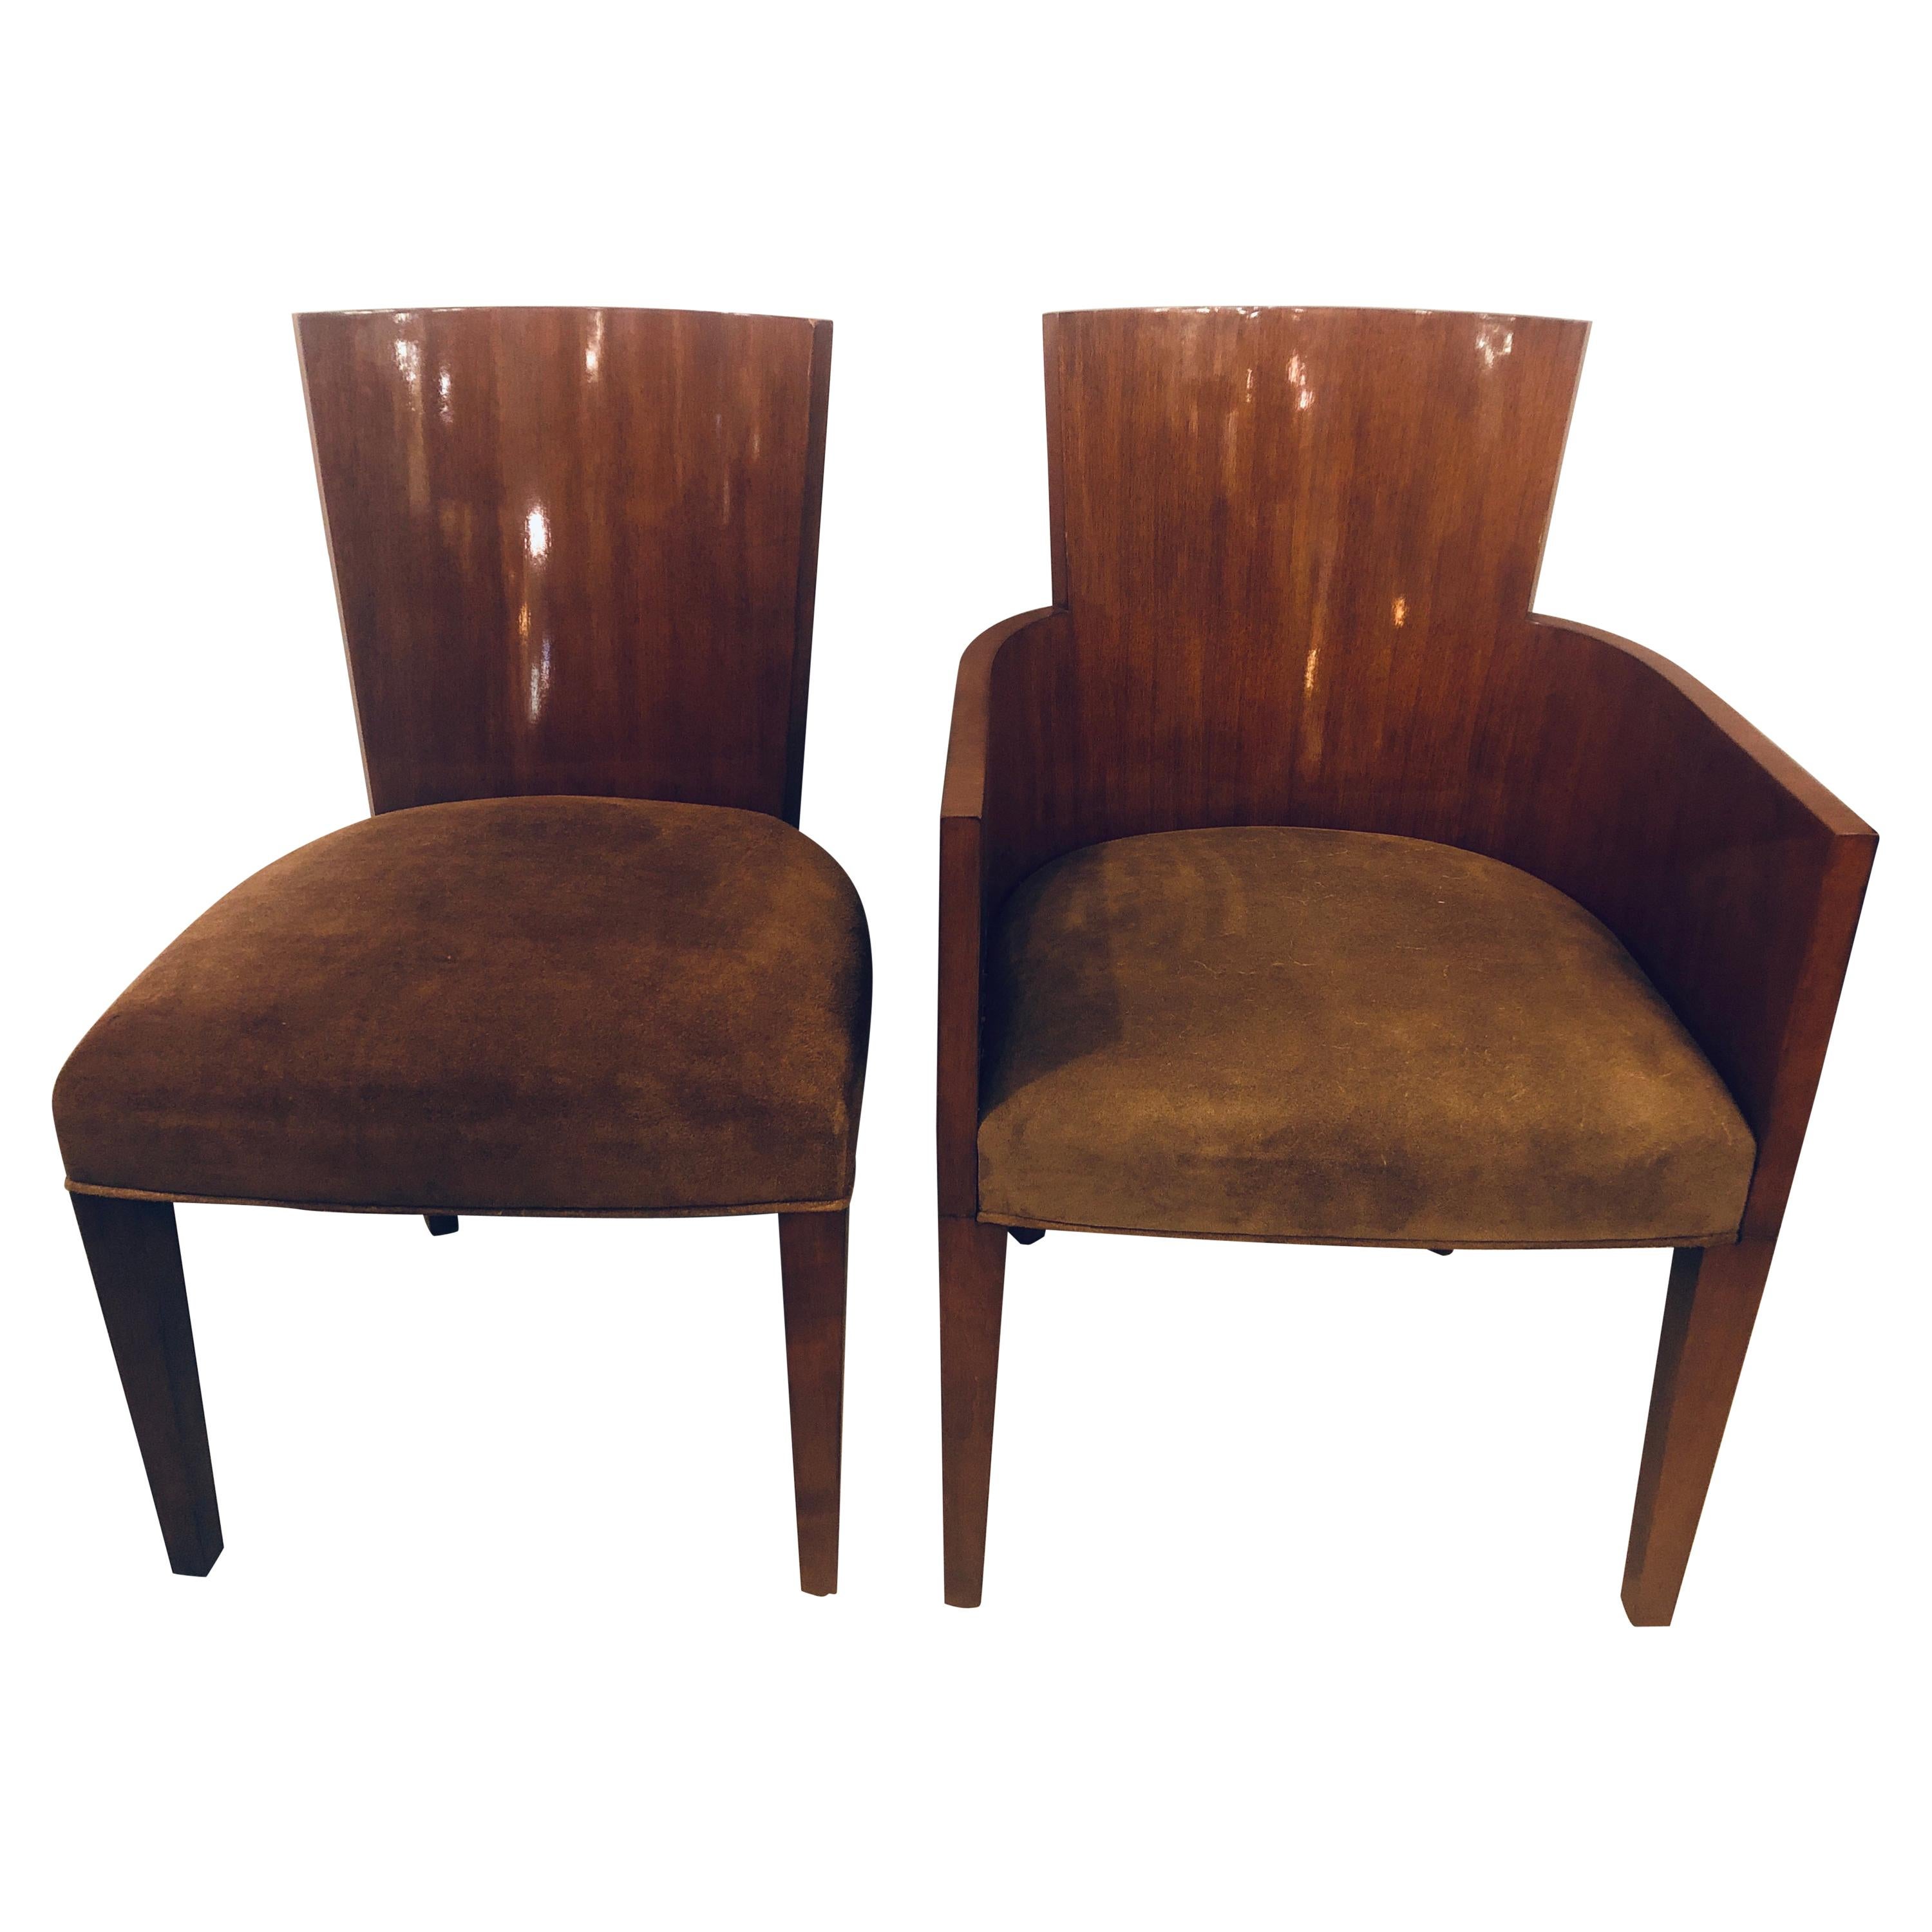 8 Modern Hollywood Mahogany Ralph Lauren Dining Chairs with Suede Seats 6  and 2 at 1stDibs | ralph lauren dining chairs for sale, ralph lauren dining  room chairs